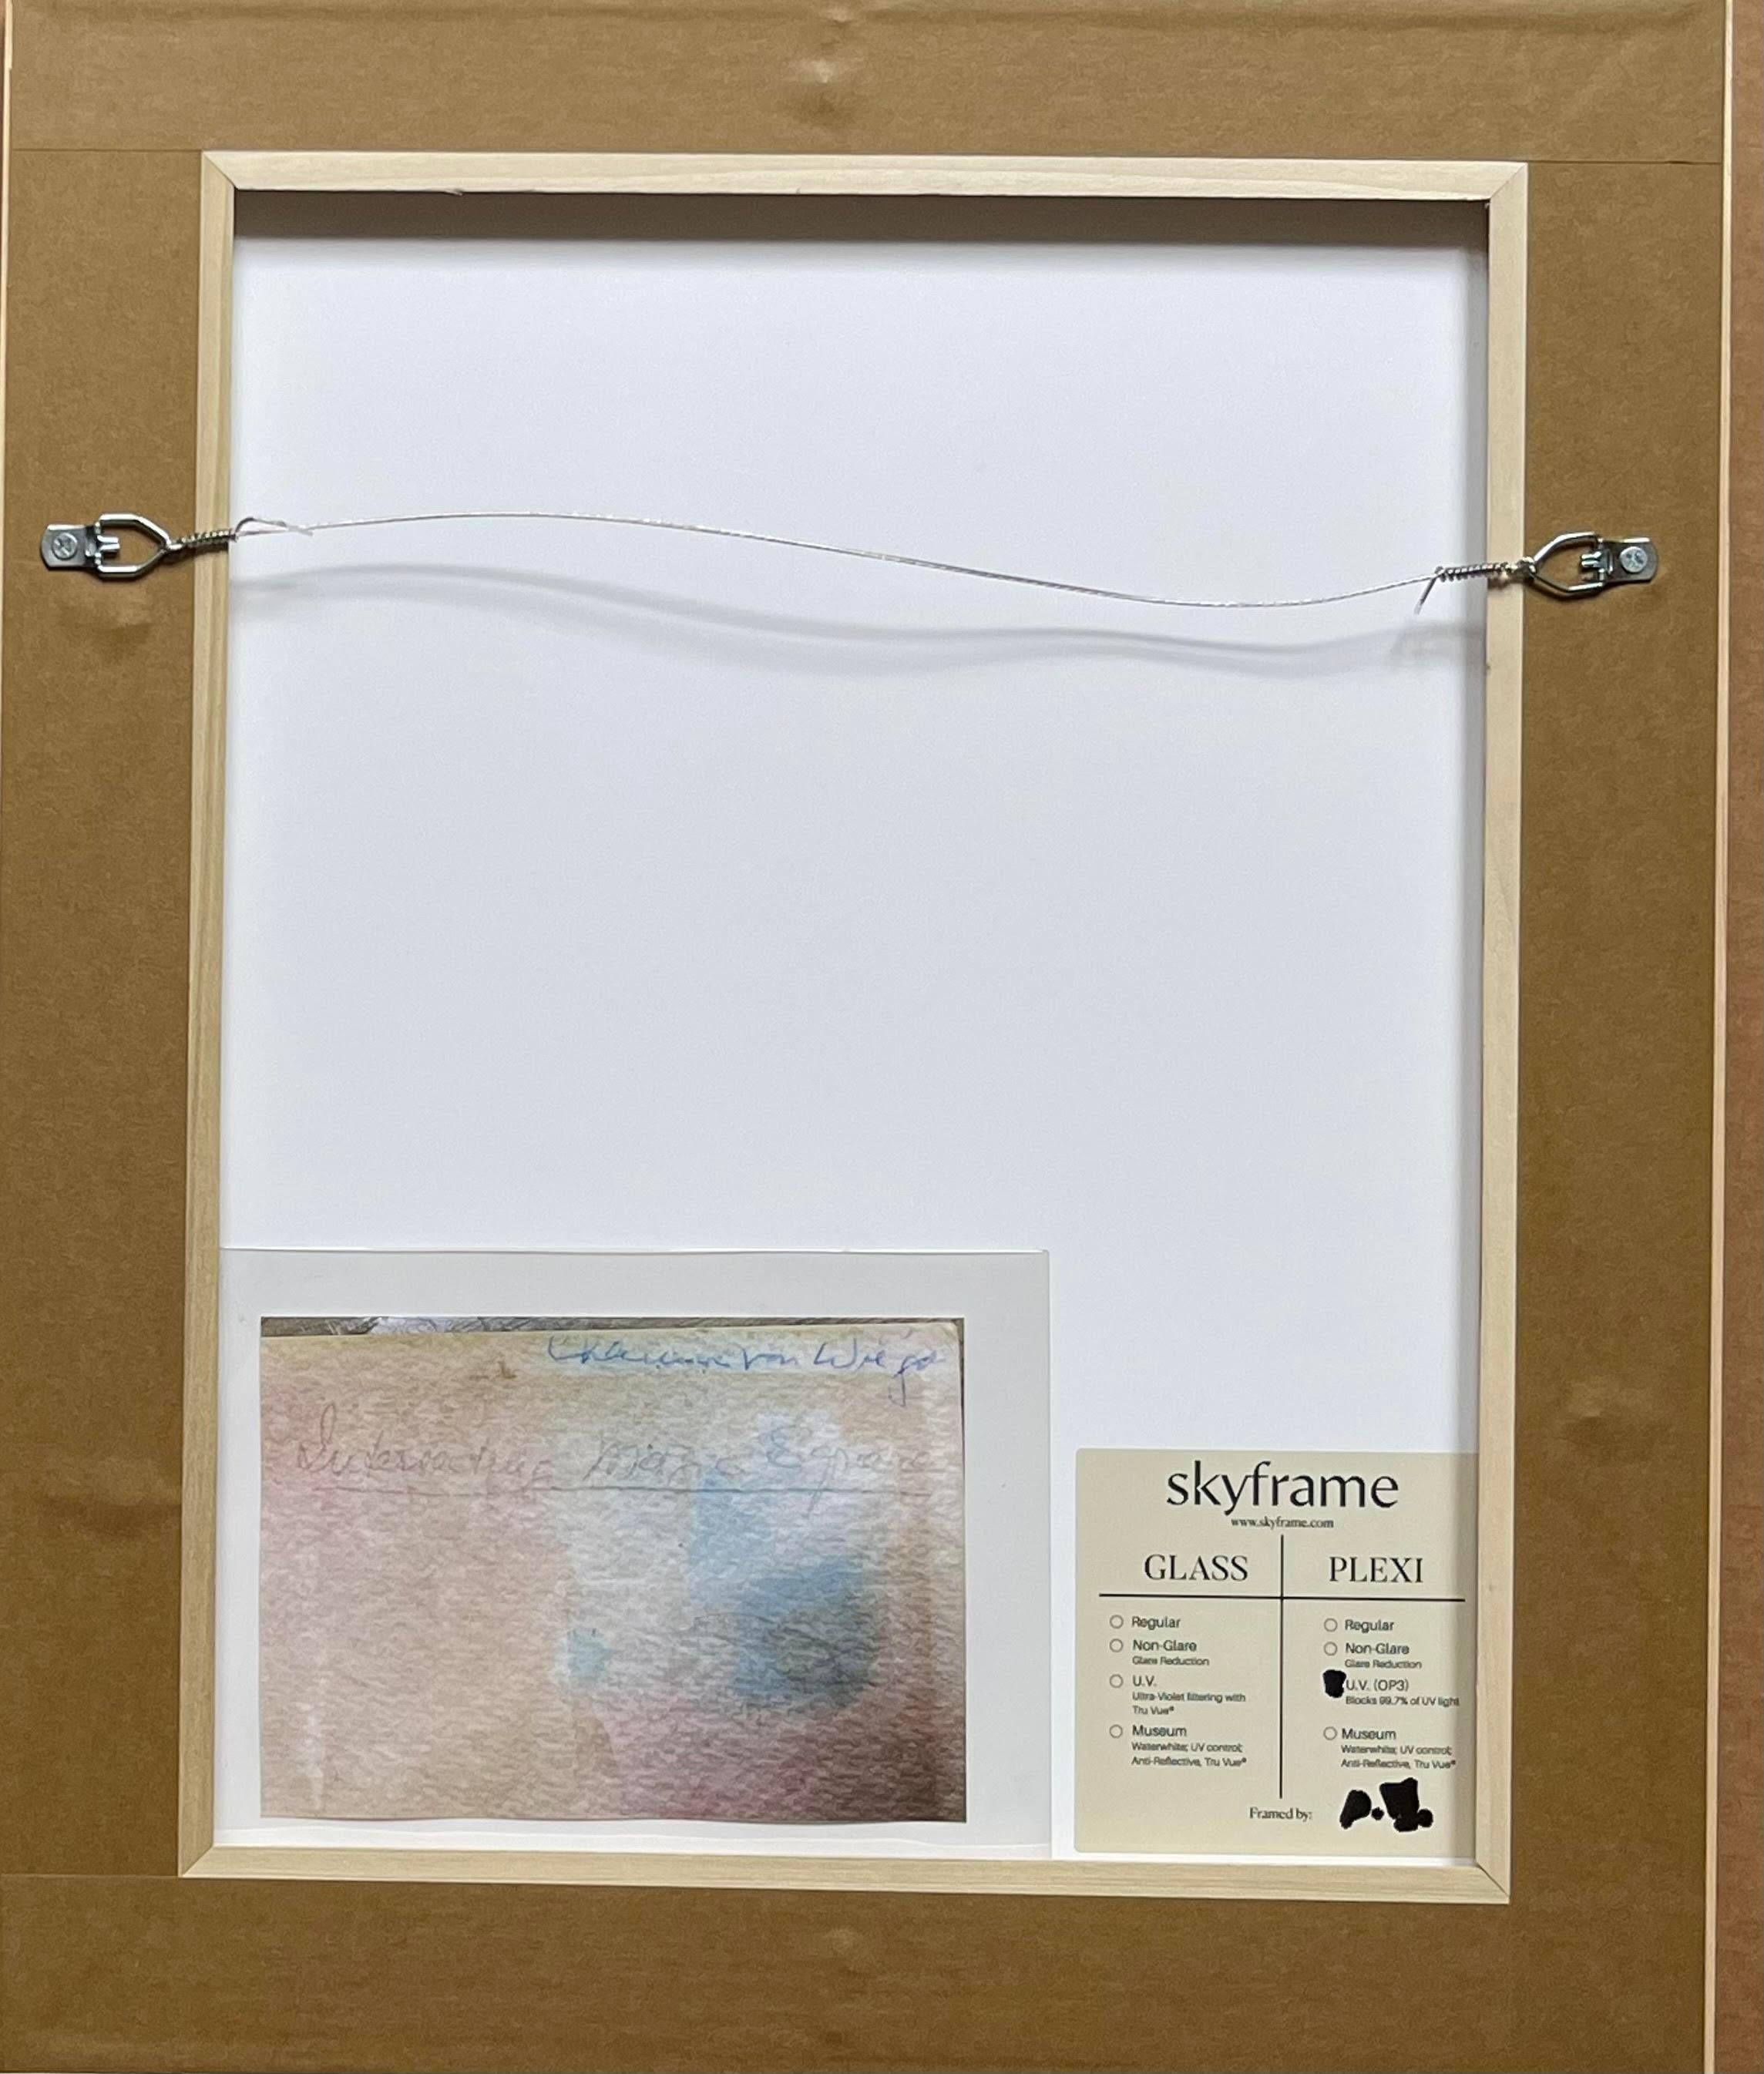 Charmion von Wiegand
Intersecting Magic Square, ca. 1963
Gouache on paperboard
Signed and titled on the back of the artwork. The signature shown on the frame back is a photo of the actual signature on the artwork itself.
Frame Included: elegantly